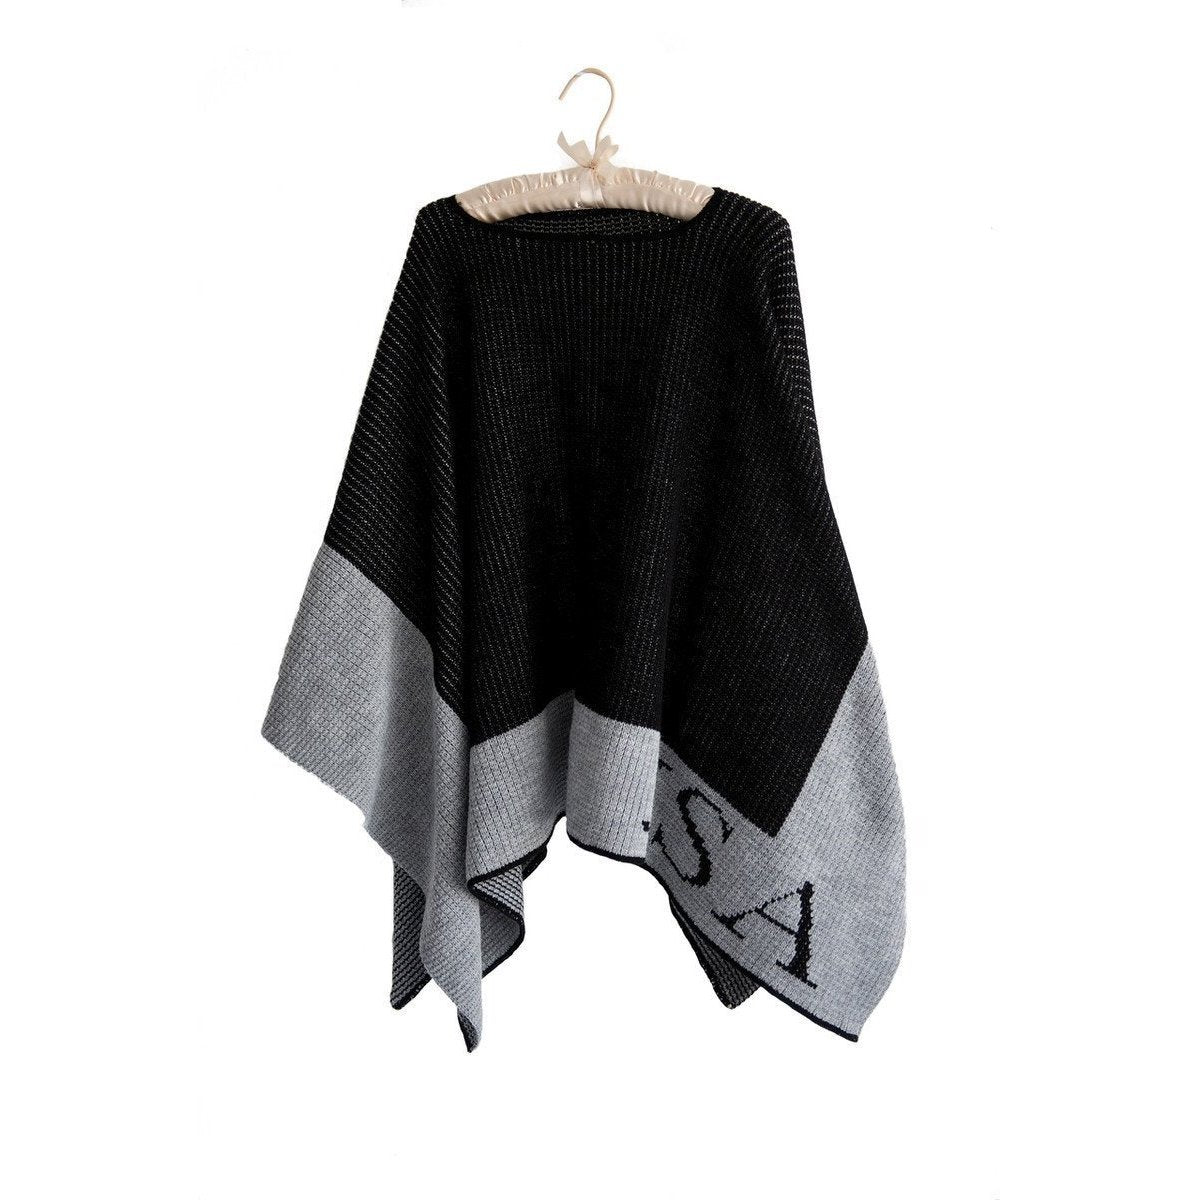 Single Border Personalized Blanket Poncho-Poncho-Default-Jack and Jill Boutique